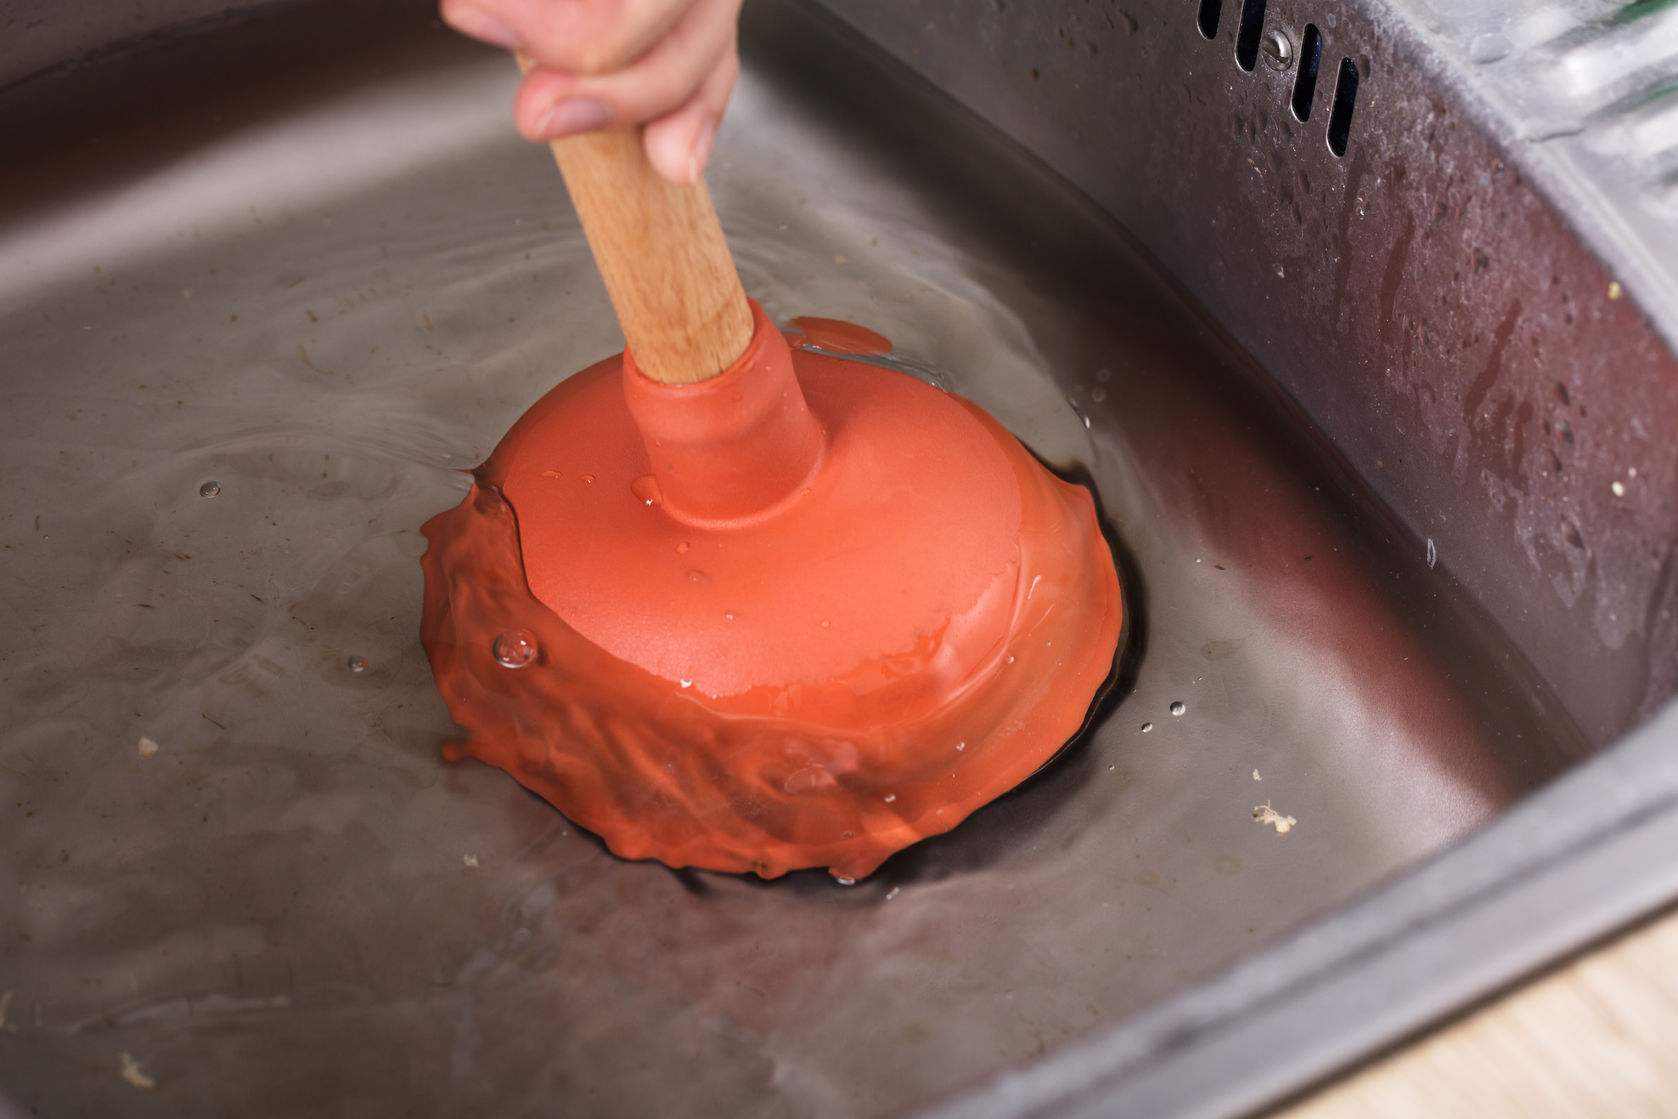 94289518 - close-up of a person cleaning sink filled with water with cup plunger